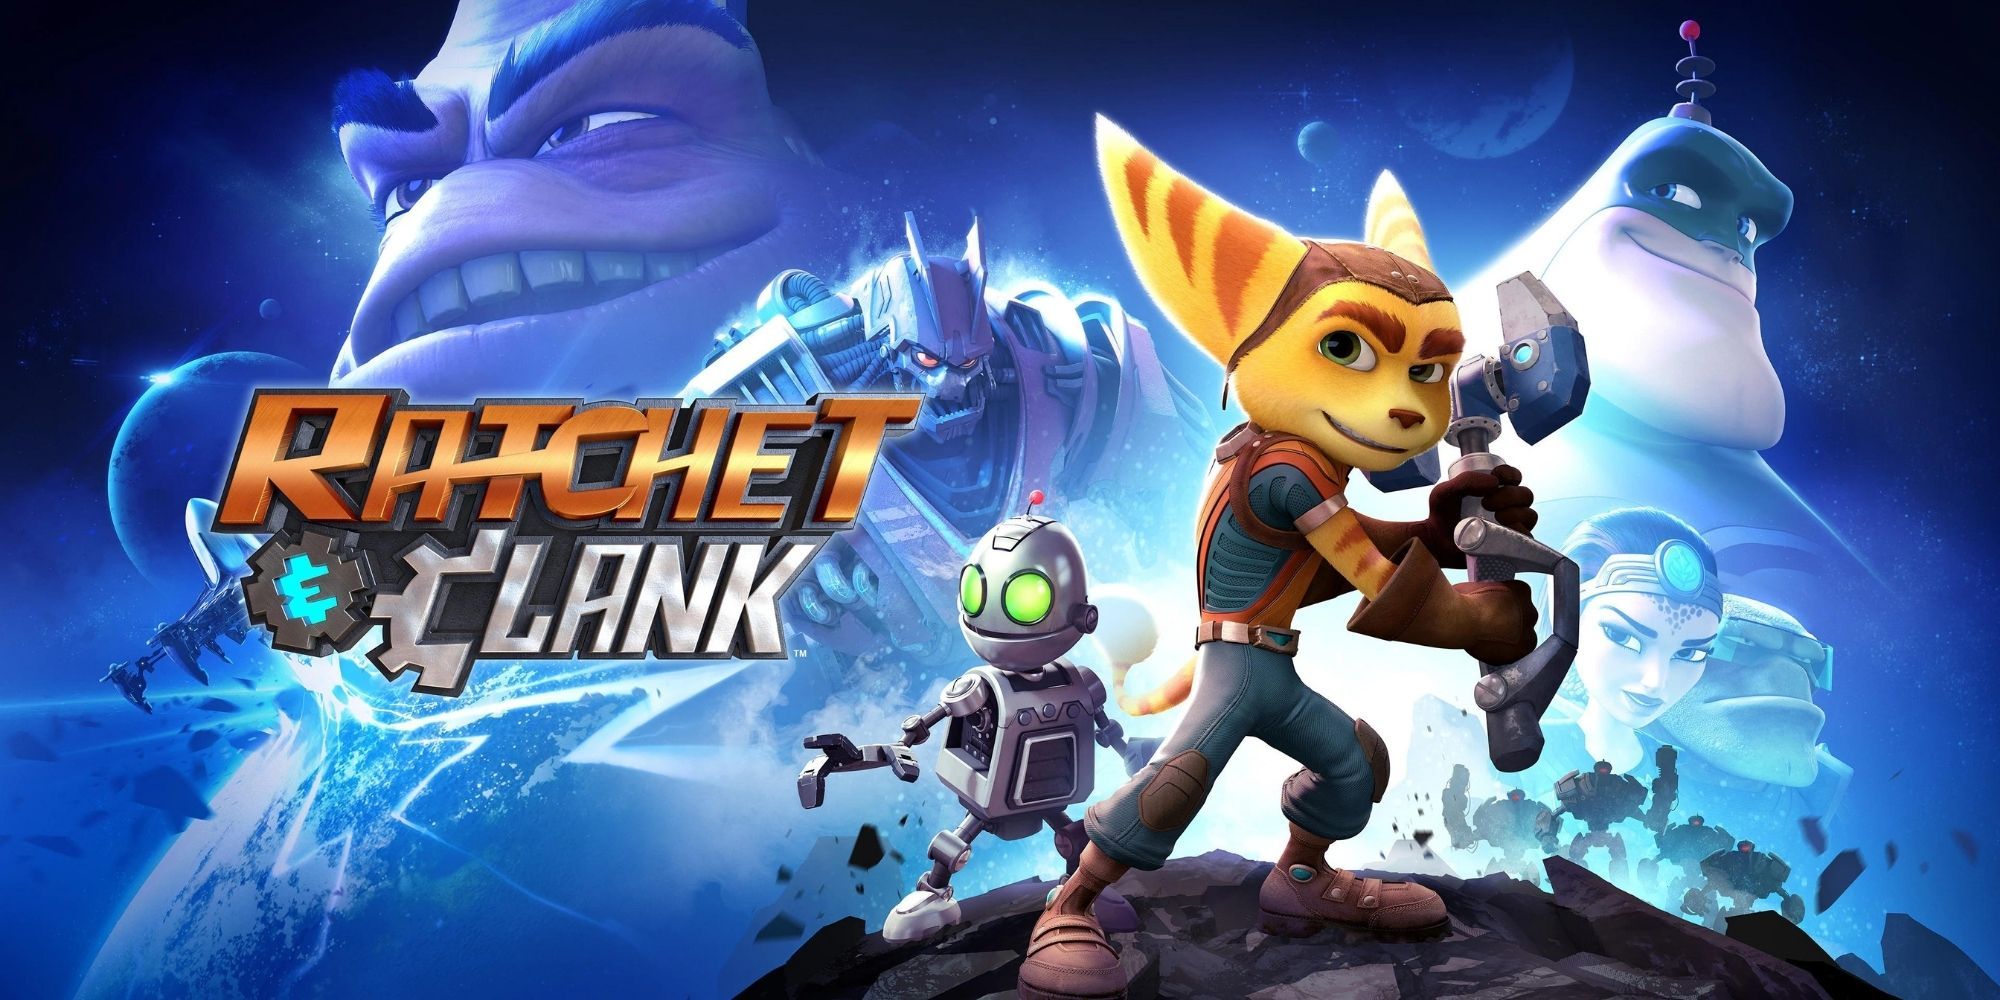 10 Best Ratchet & Clank Games, Ranked